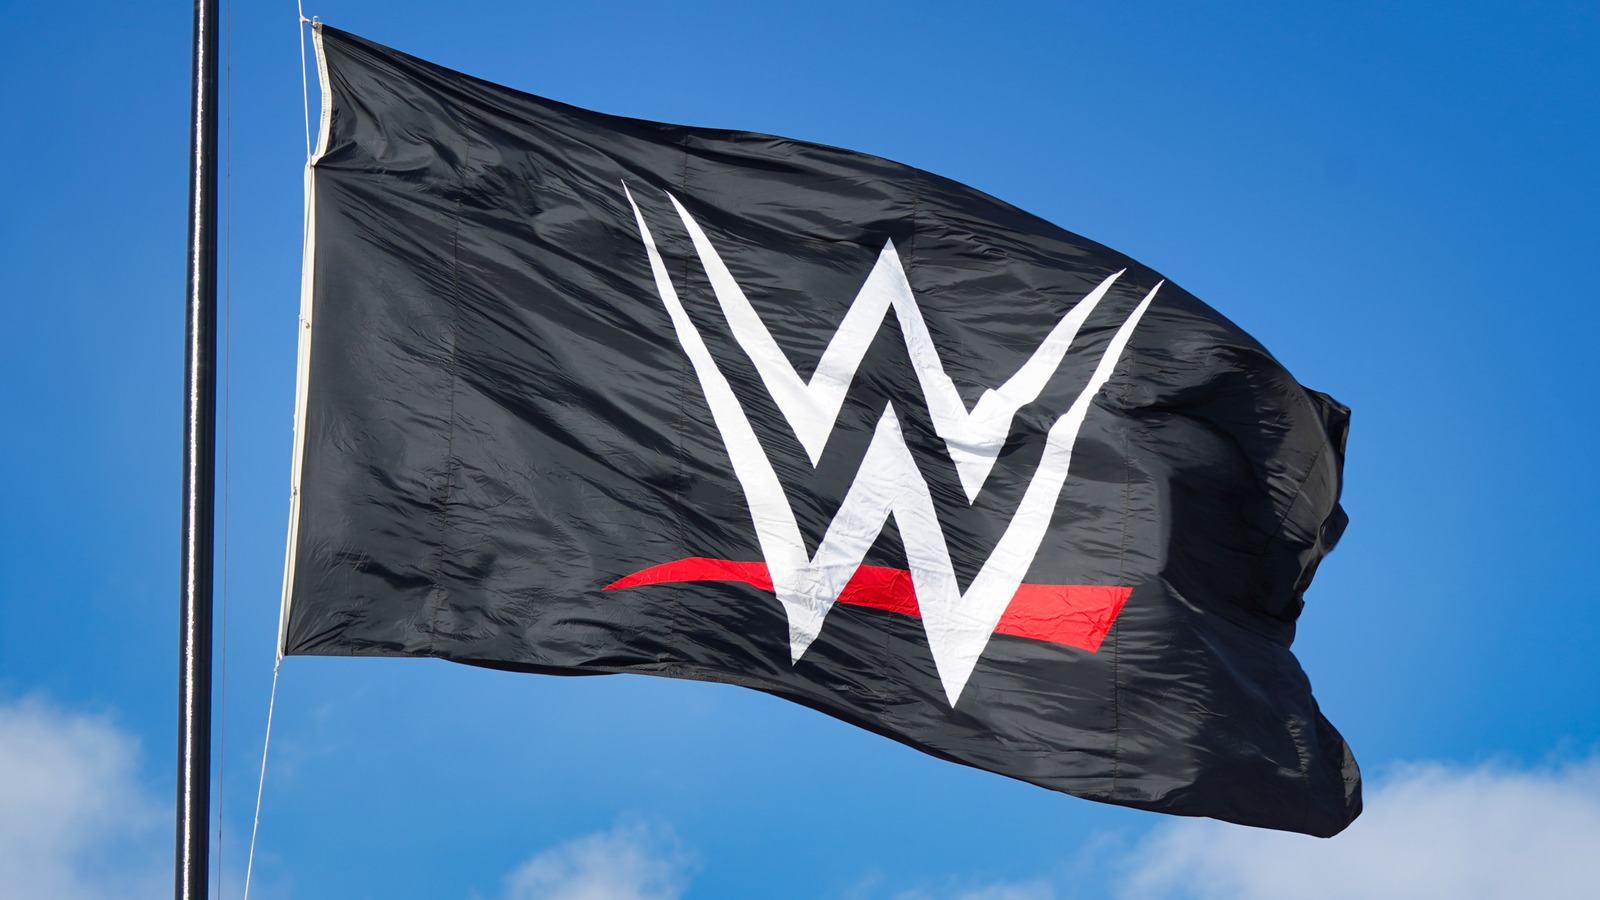 Auschwitz Memorial Labels WWE’s Concentration Camp Footage at WrestleMania 39 ‘Shameless’